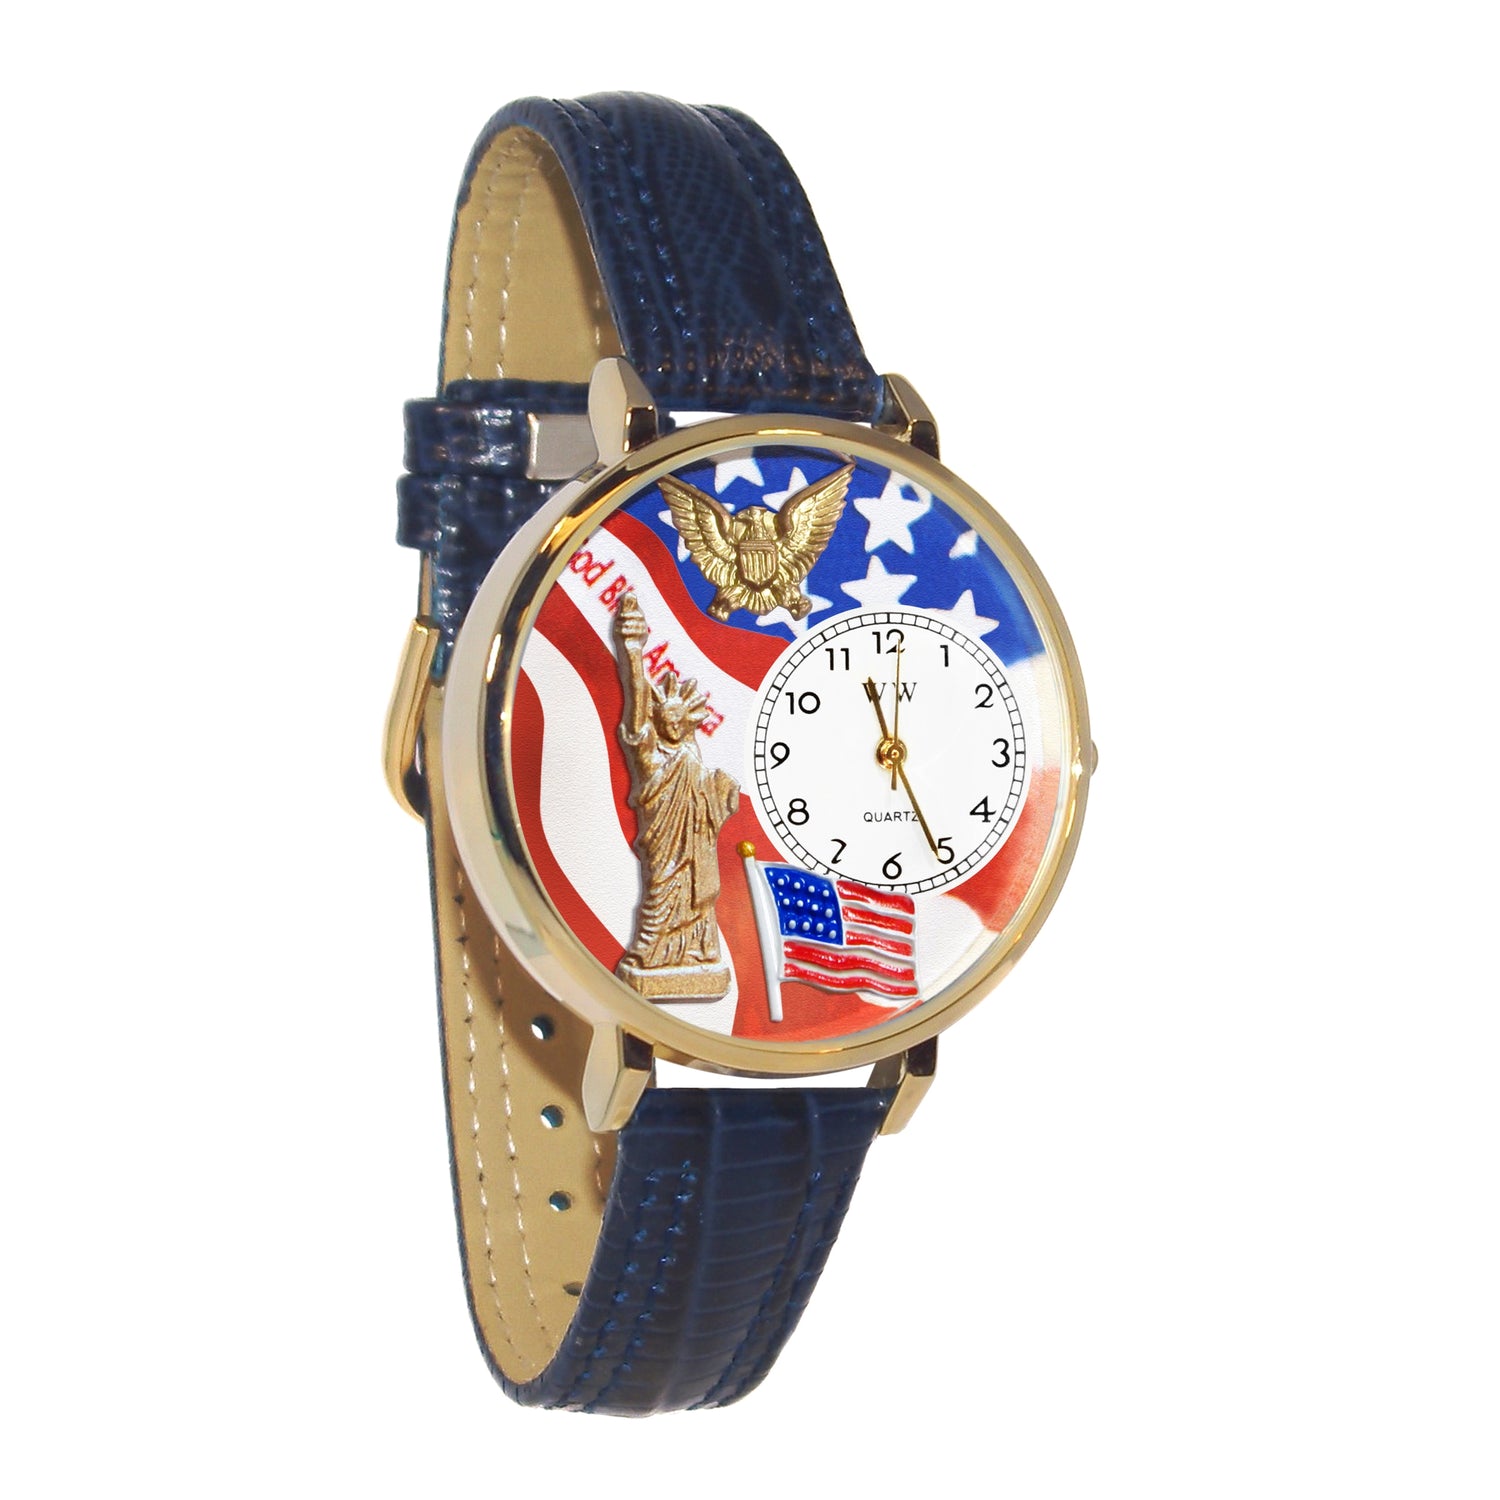 Whimsical Gifts | Statue of Liberty 3D Watch Large Style | Handmade in USA | Patriotic |  | Novelty Unique Fun Miniatures Gift | Gold Finish Navy Blue Leather Watch Band